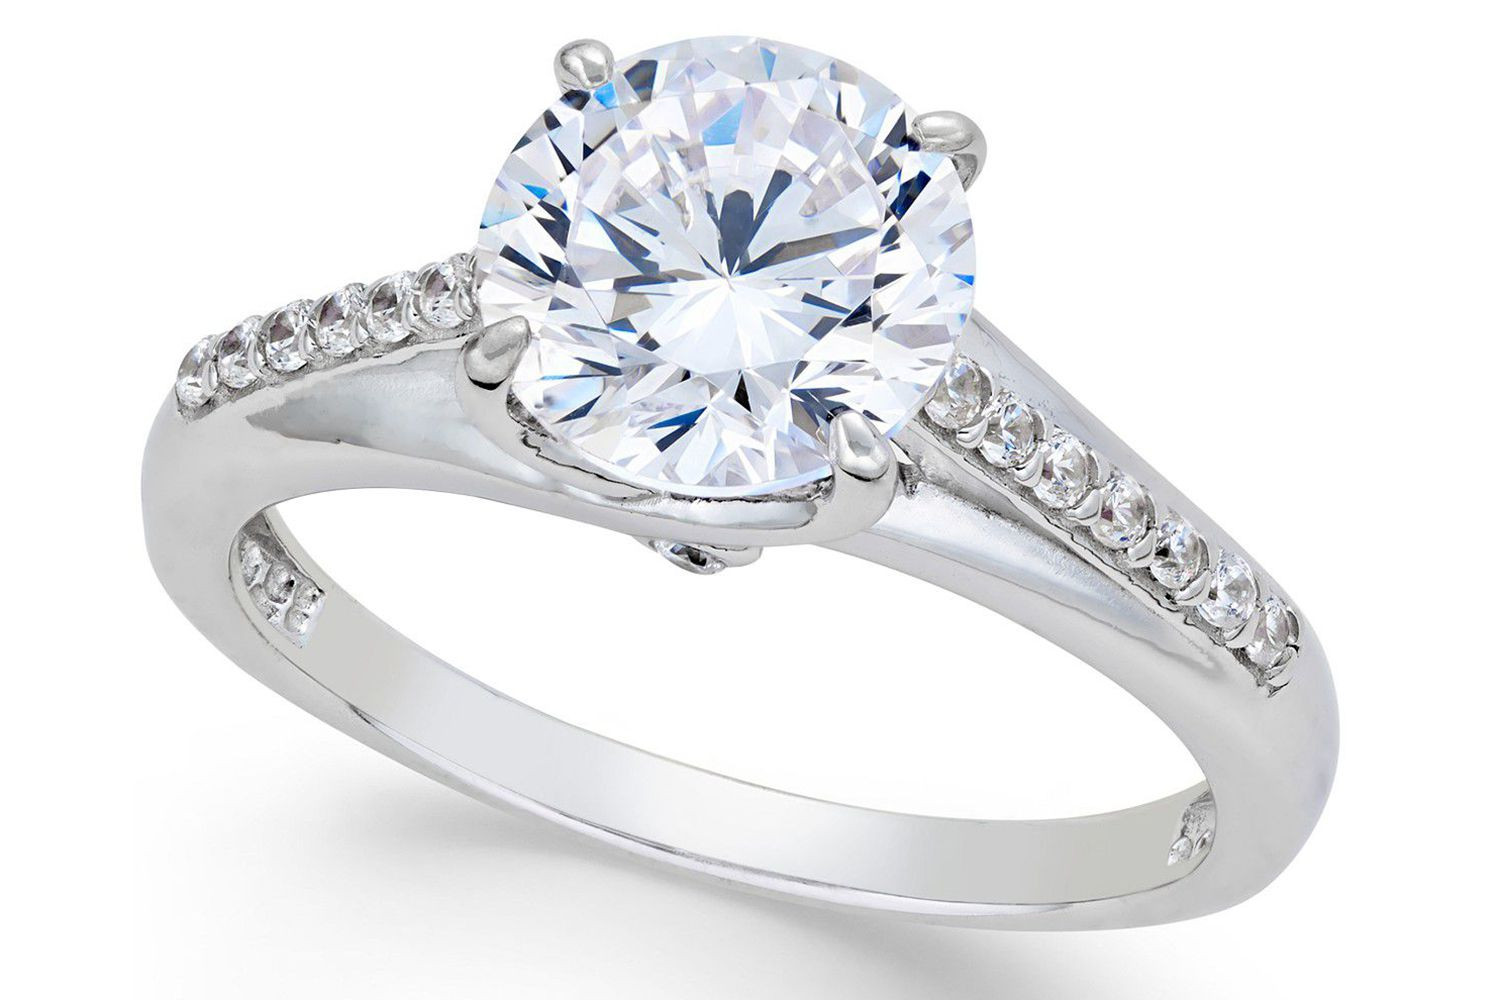 Real Wedding Rings
 The 6 Best Fake Engagement Rings to Wear When You Travel